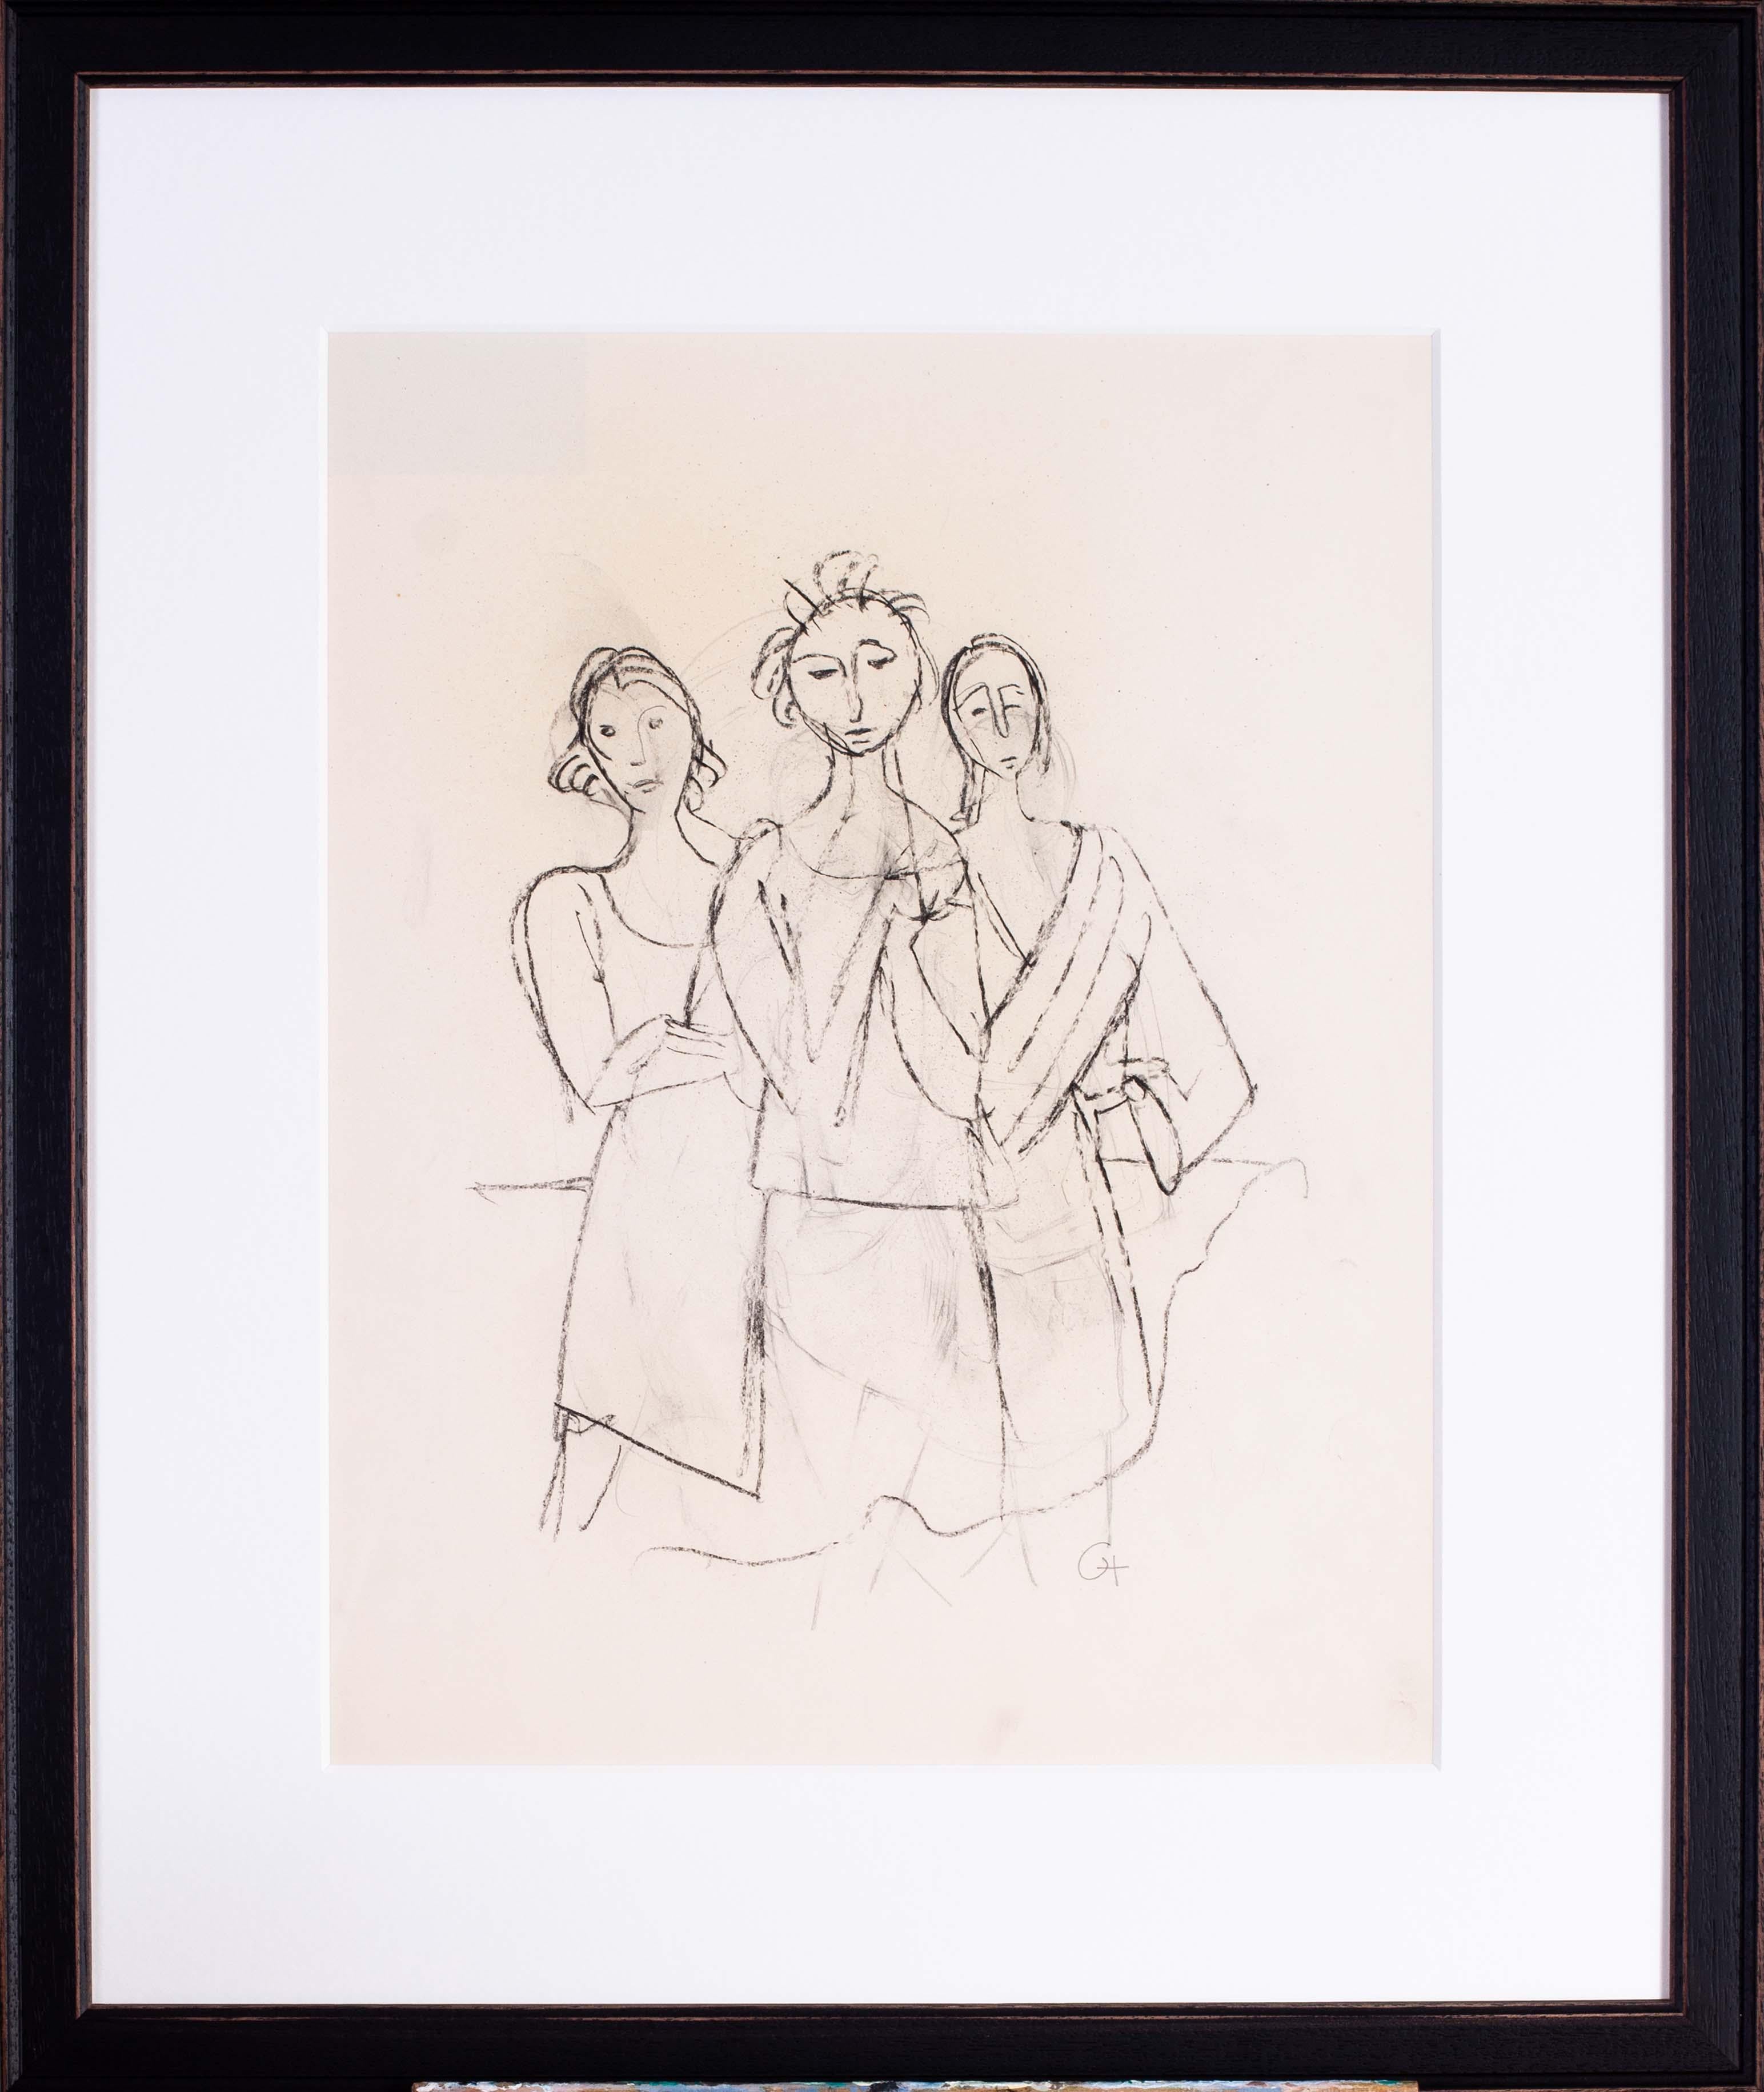 German Expressionist figurative drawing by Carl Hofer 'Sisters'